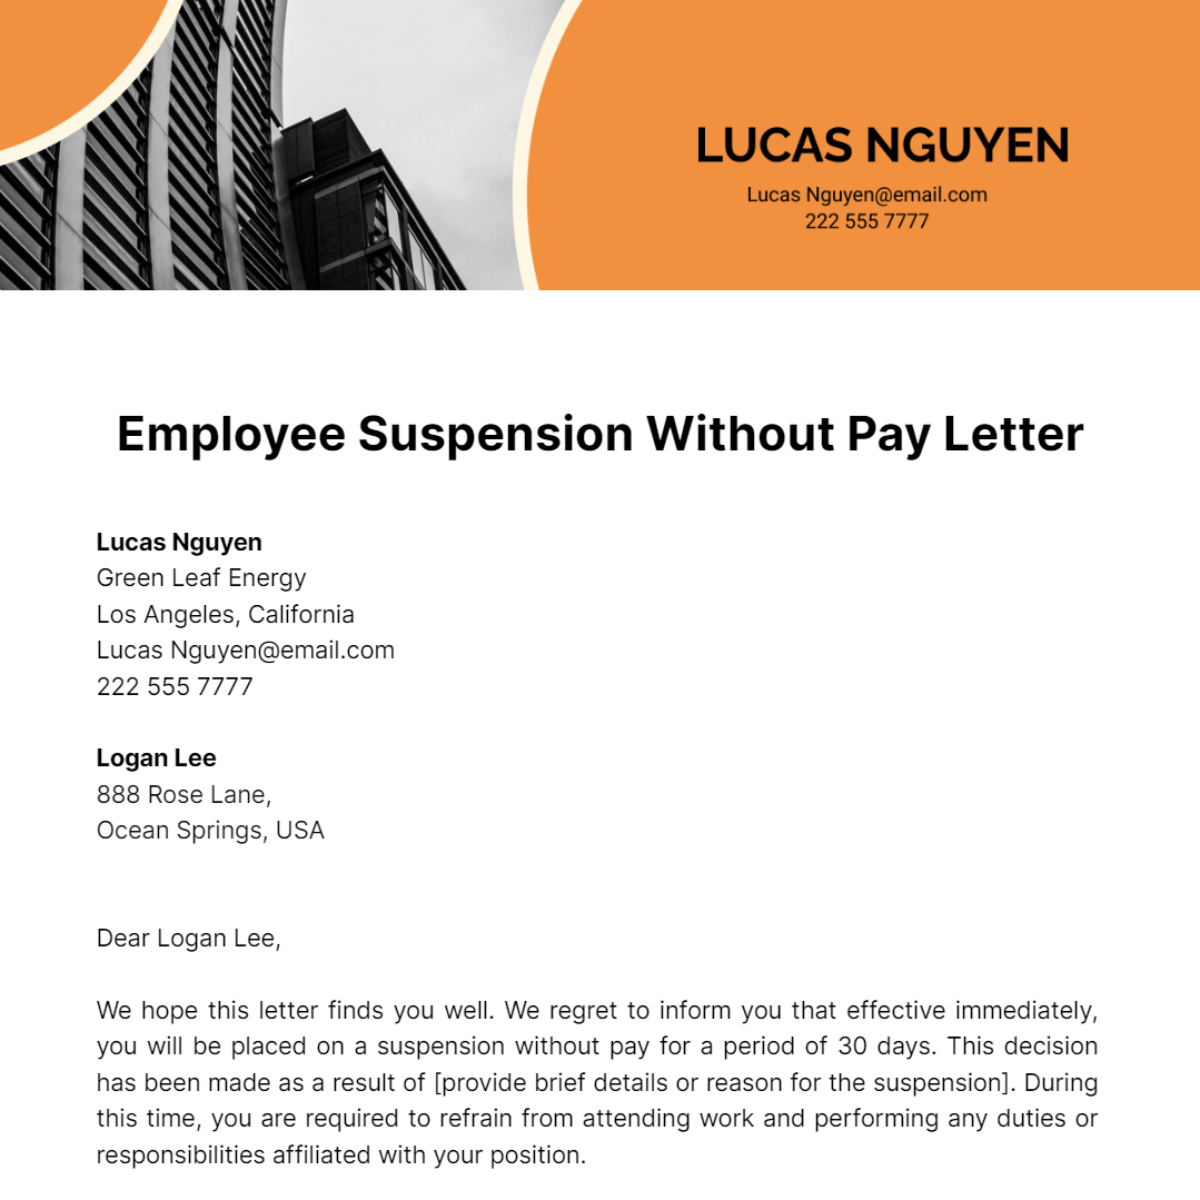 Employee Suspension Without Pay Letter Template